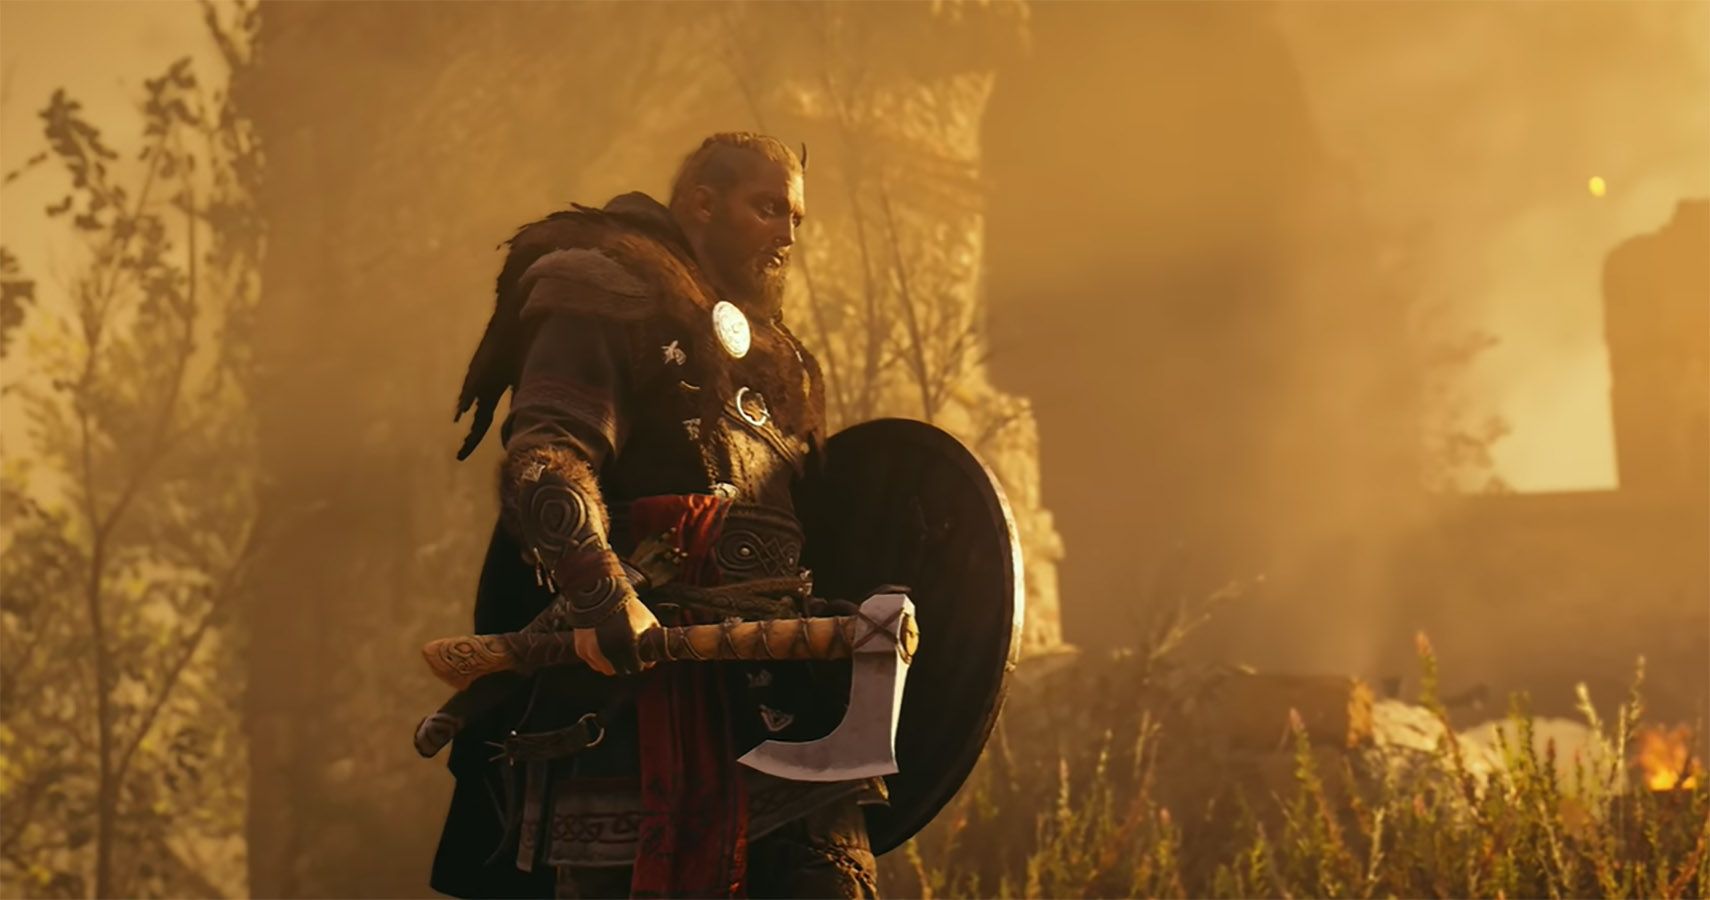 Image from Assassin's Creed Valhalla launch trailer